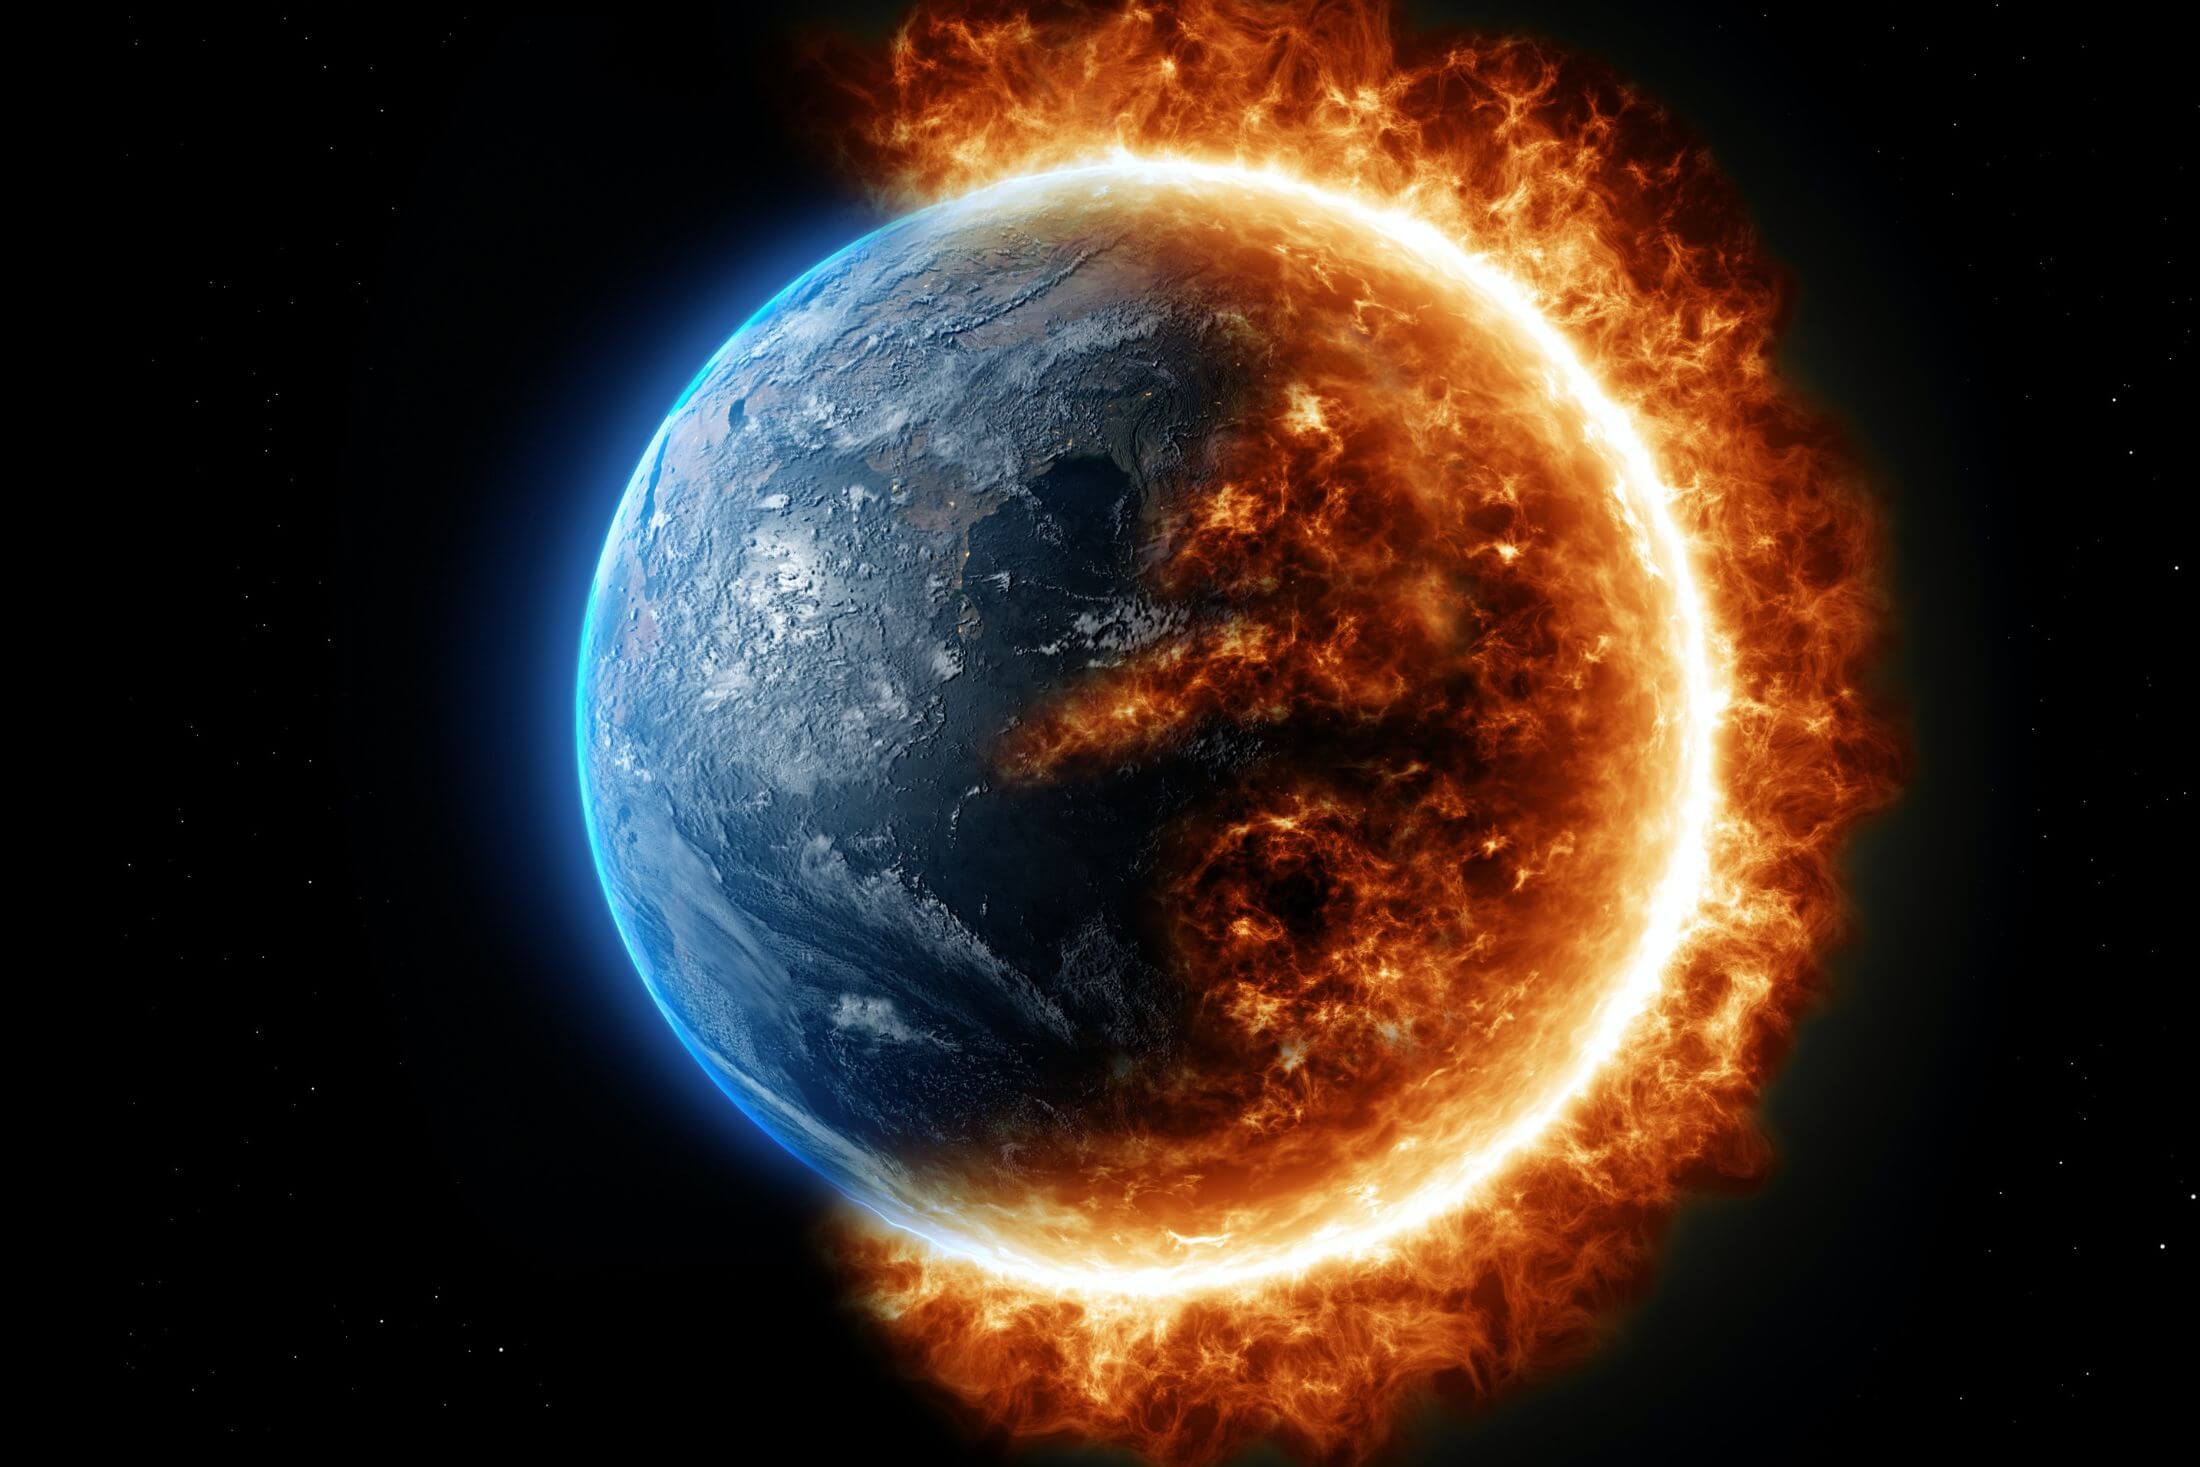 Stylized view of the Earth in space with a third of it in shadow and two-thirds with a ring of fire around it